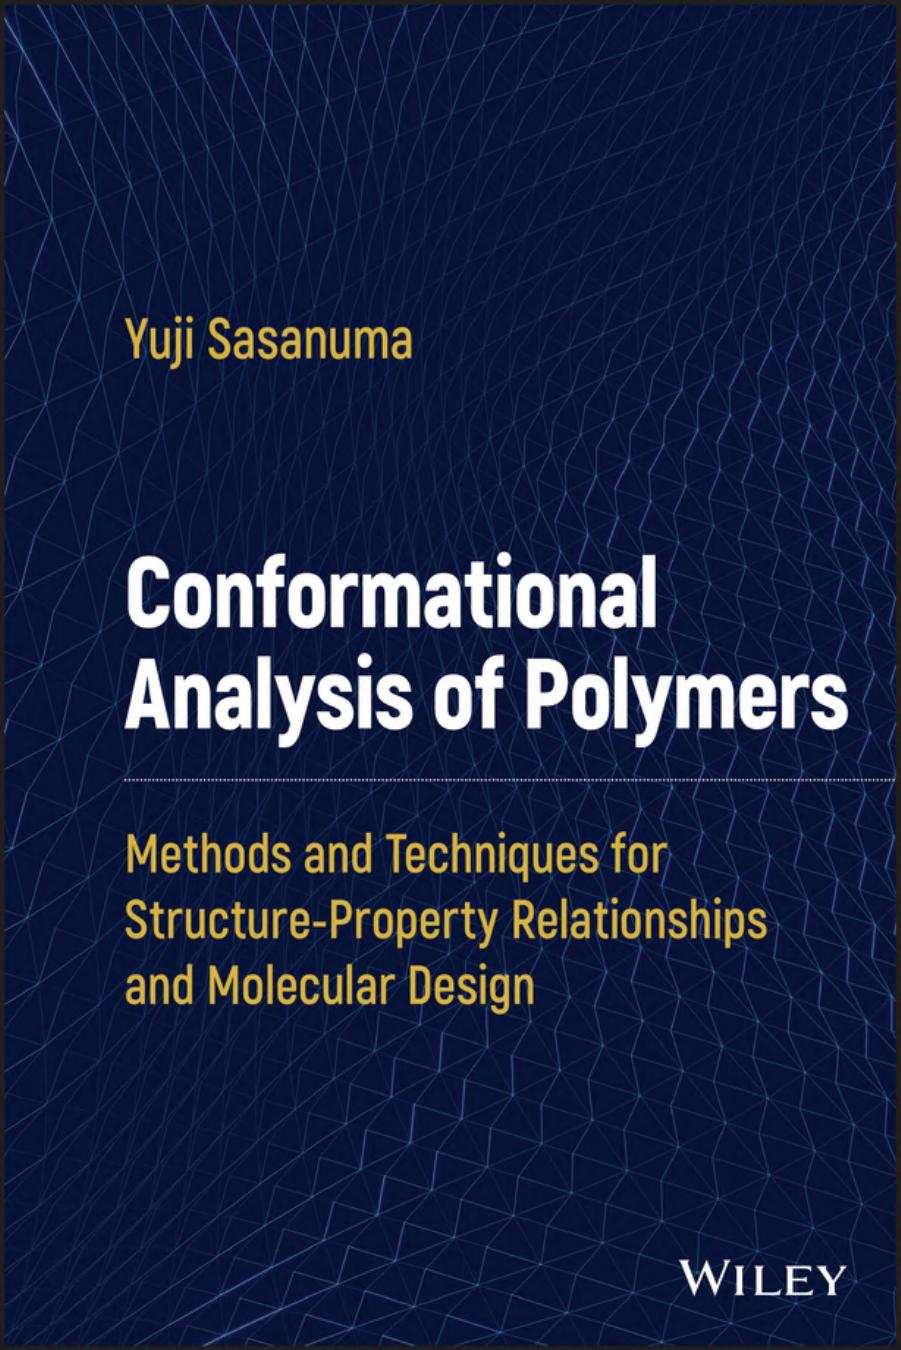 Conformational Analysis of Polymers: Methods and Techniques for Structure-Property Relationships and Molecular Design by Sasanuma Y